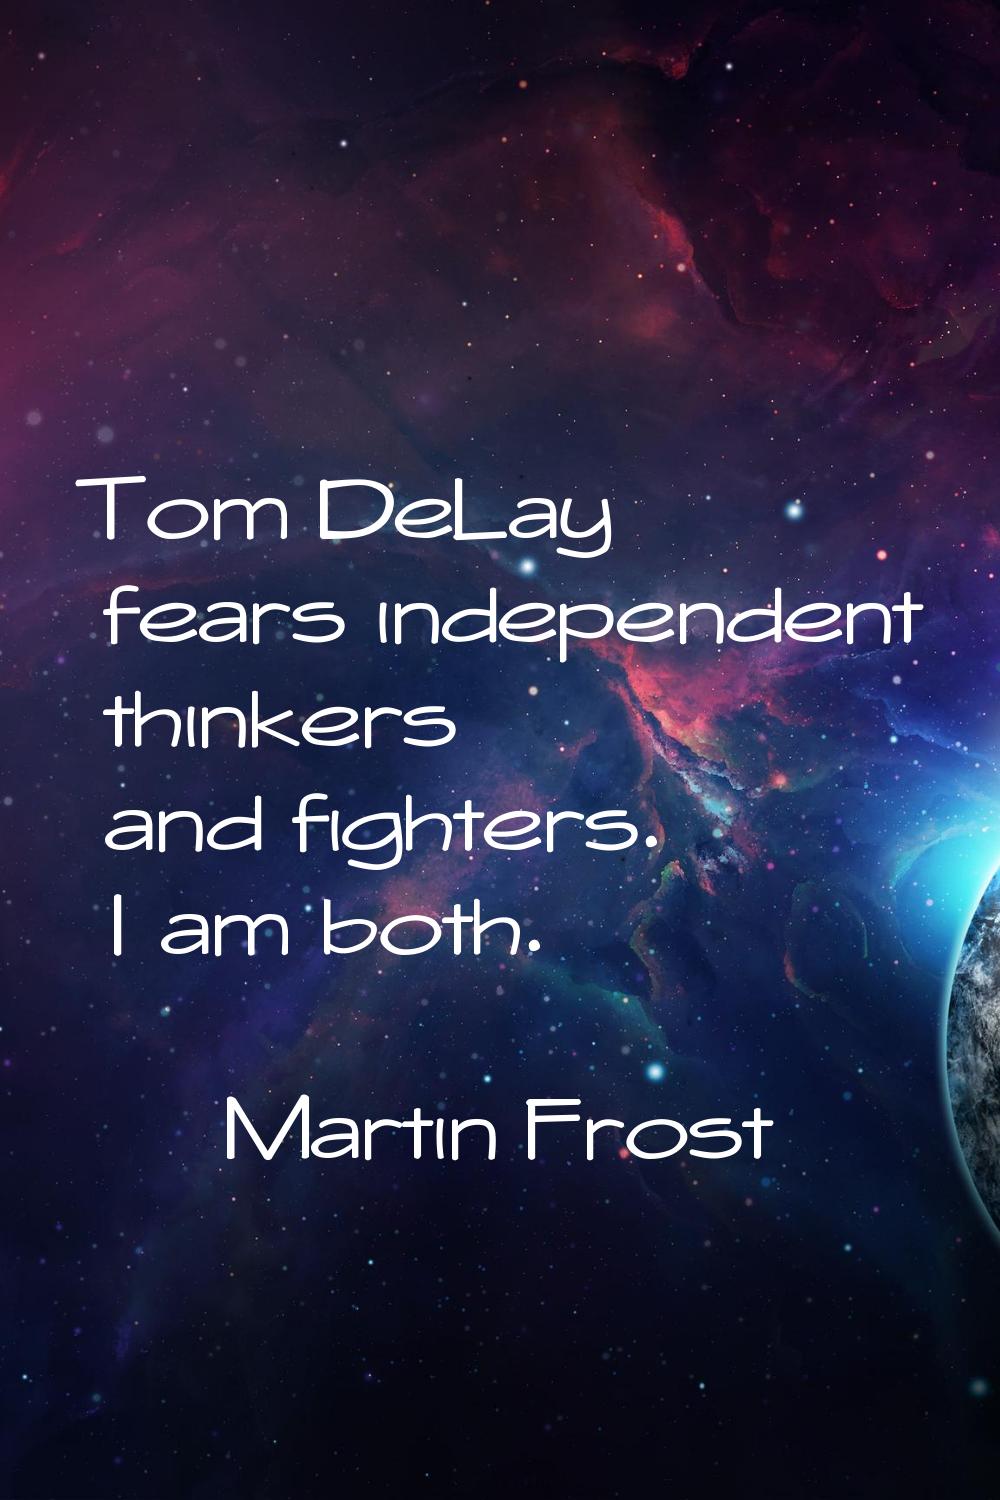 Tom DeLay fears independent thinkers and fighters. I am both.